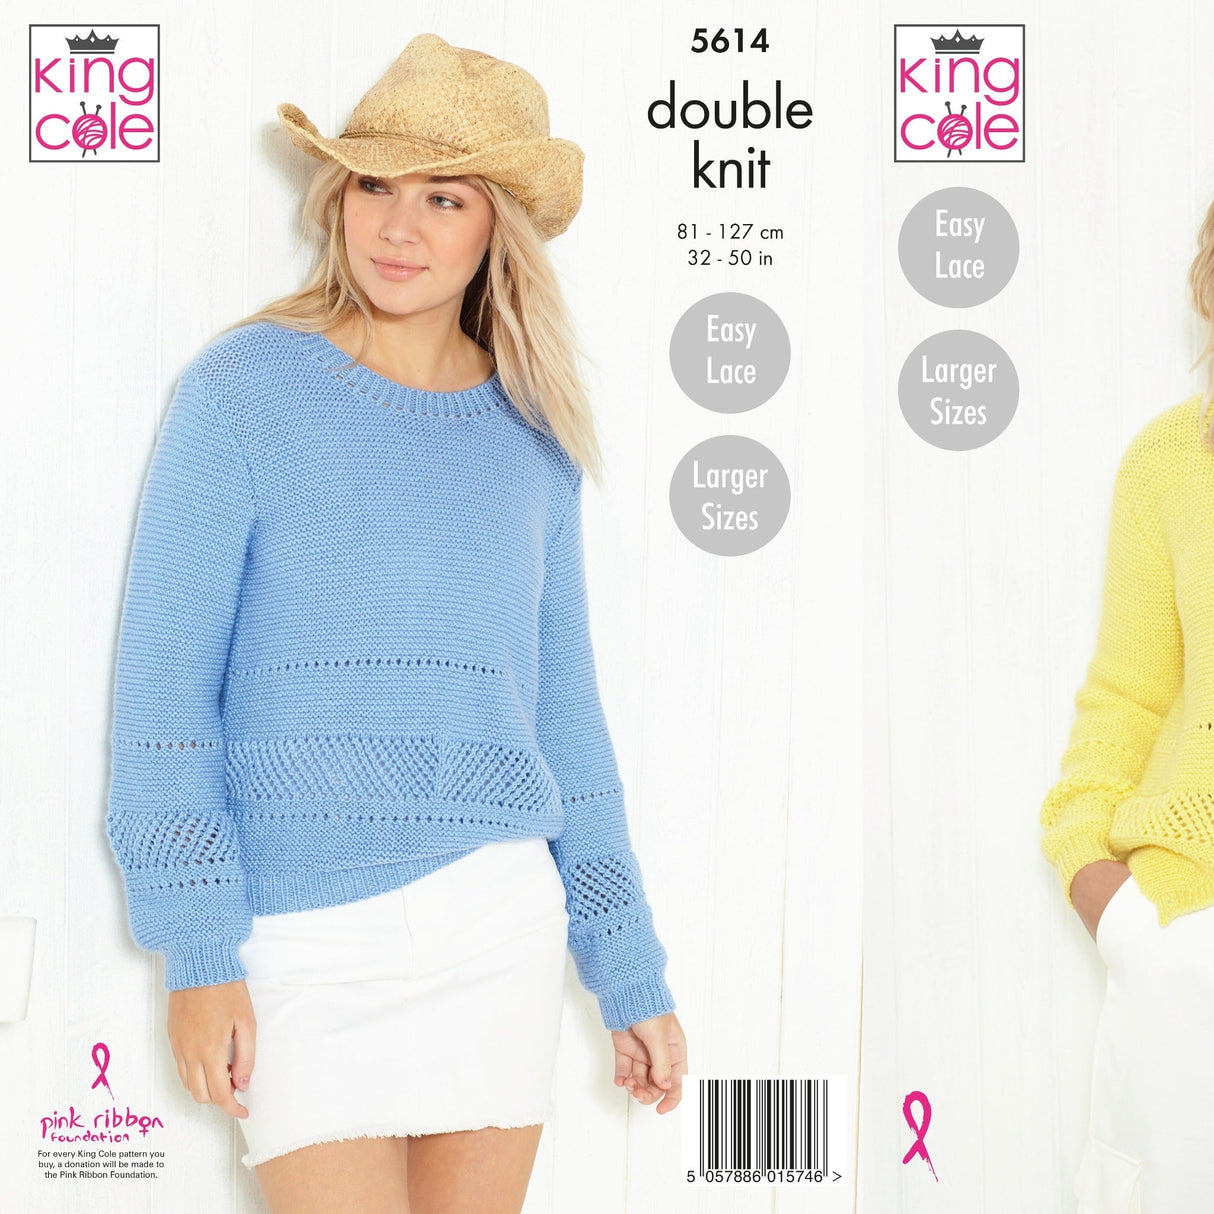 King Cole Patterns King Cole Ladies Sweater and Cardigan DK Knitting Pattern 5614